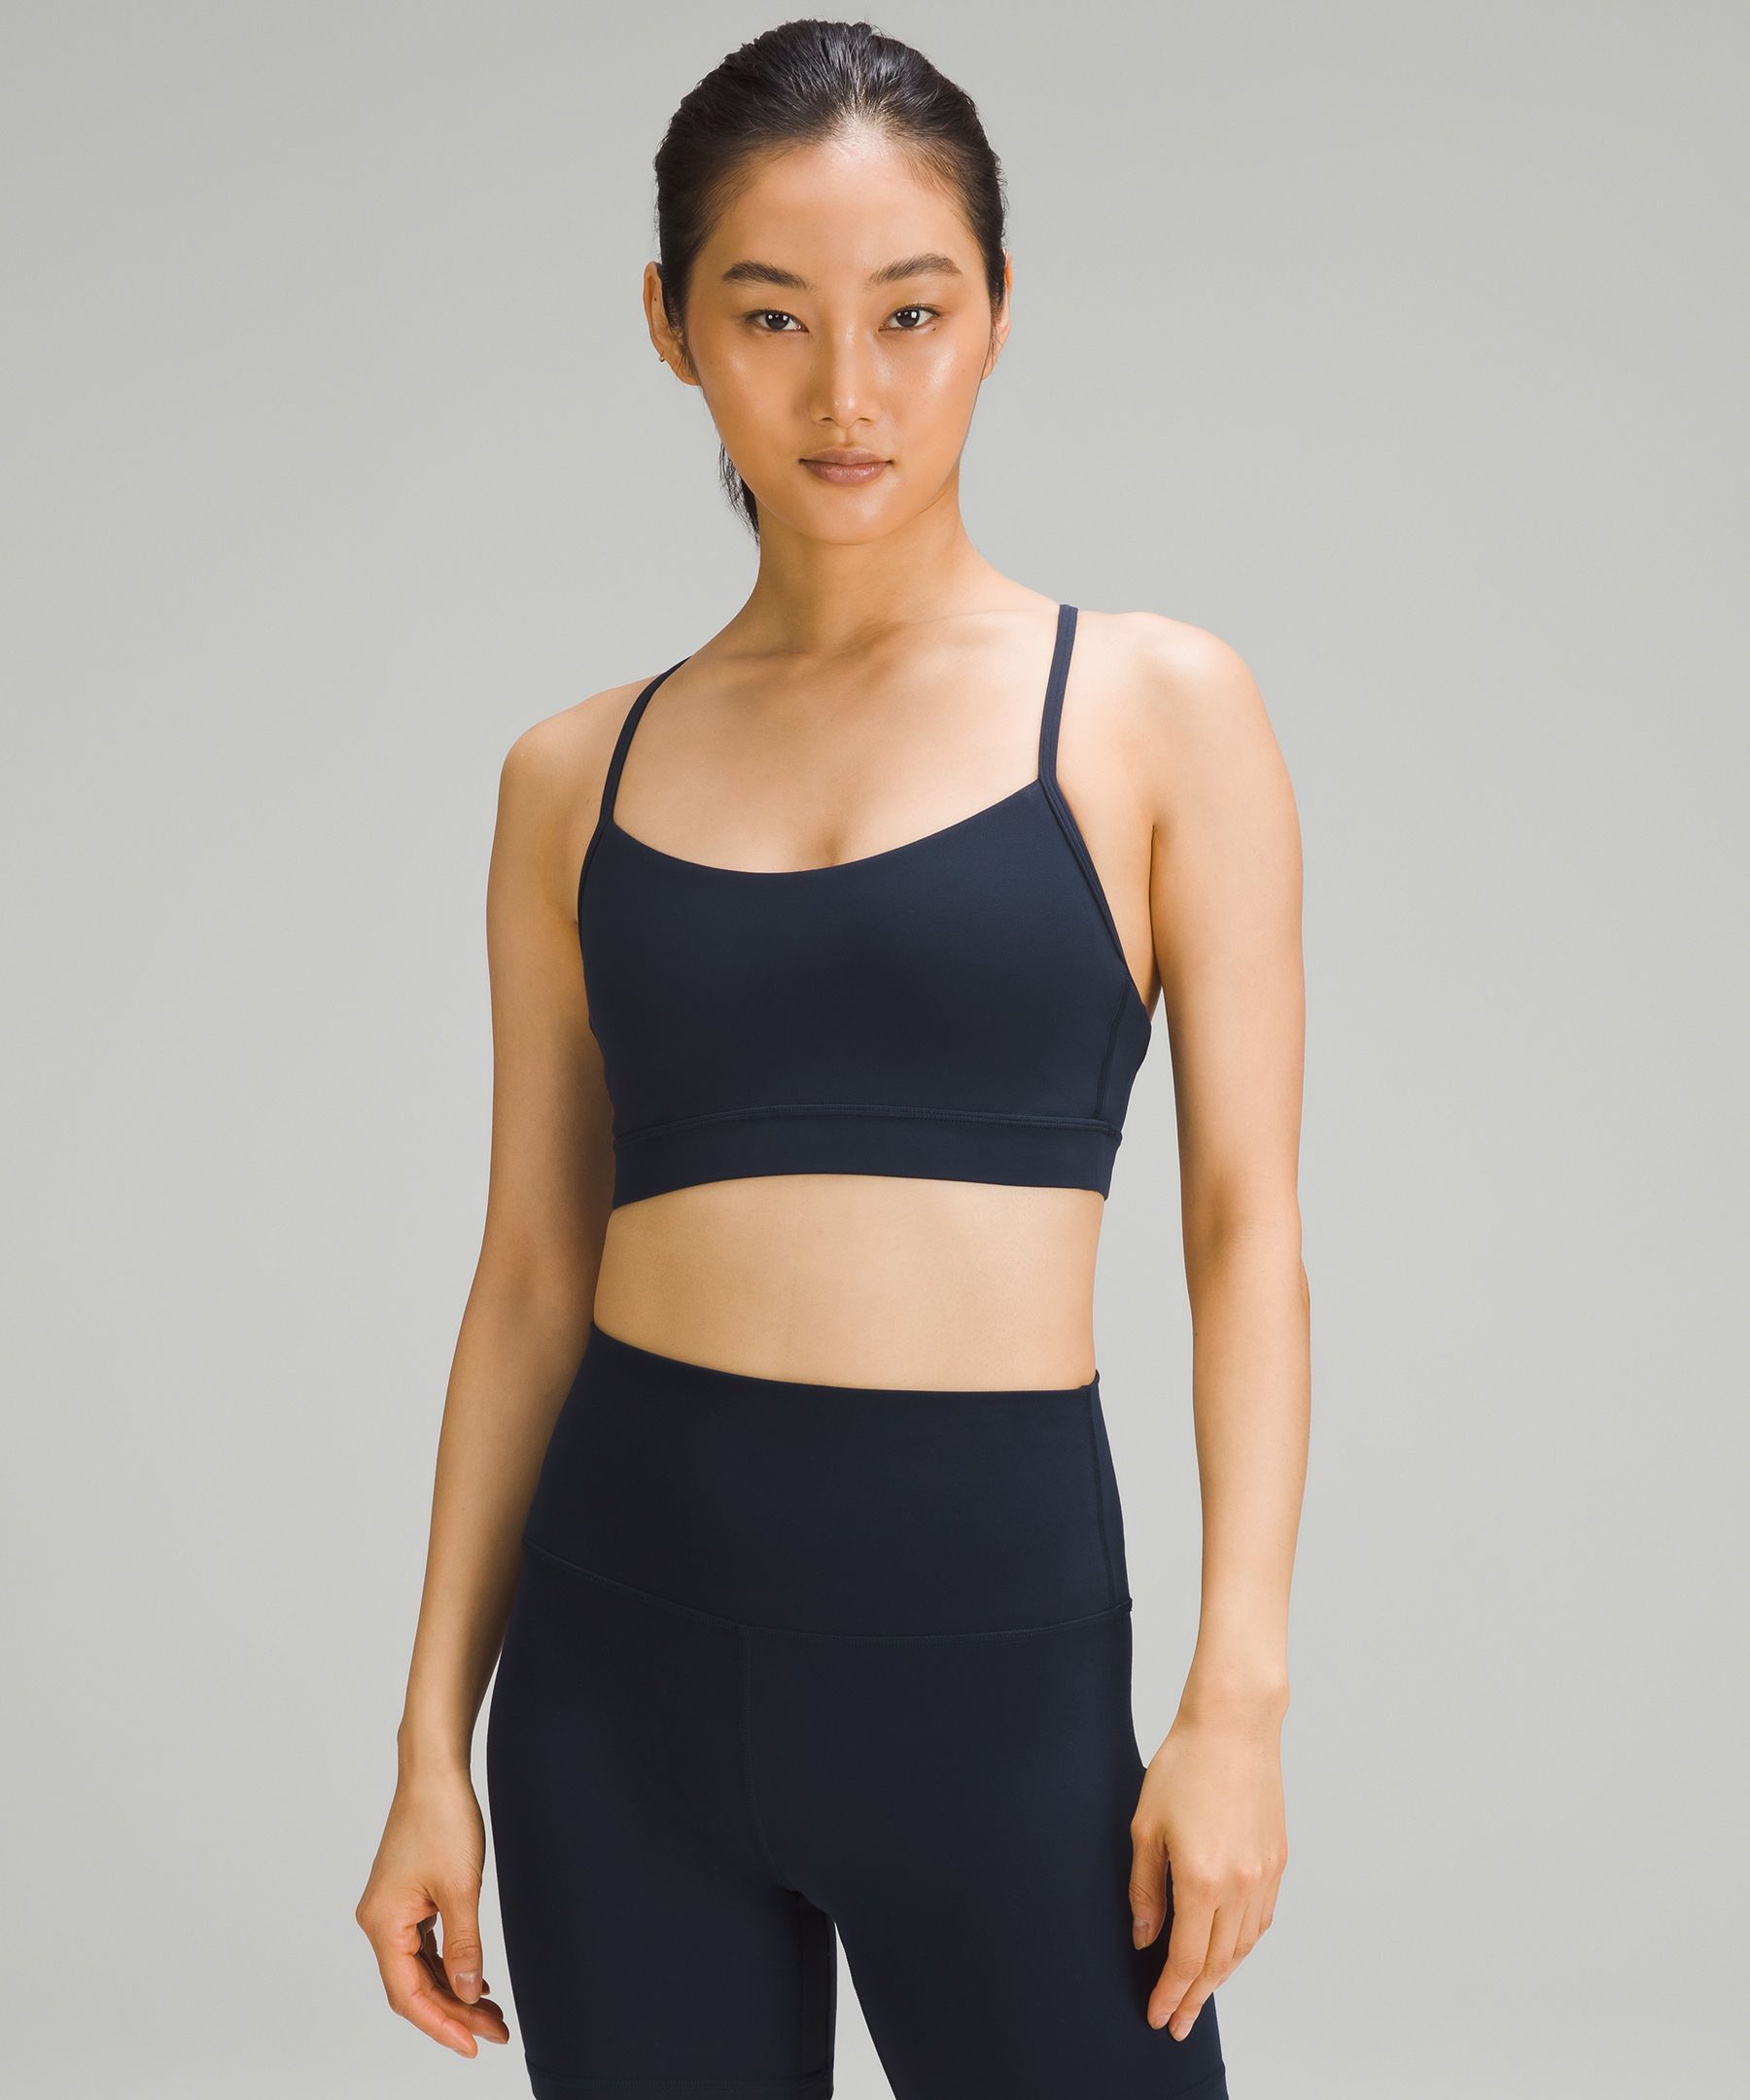 Y-FIT WEAR - Align Capsule Collection